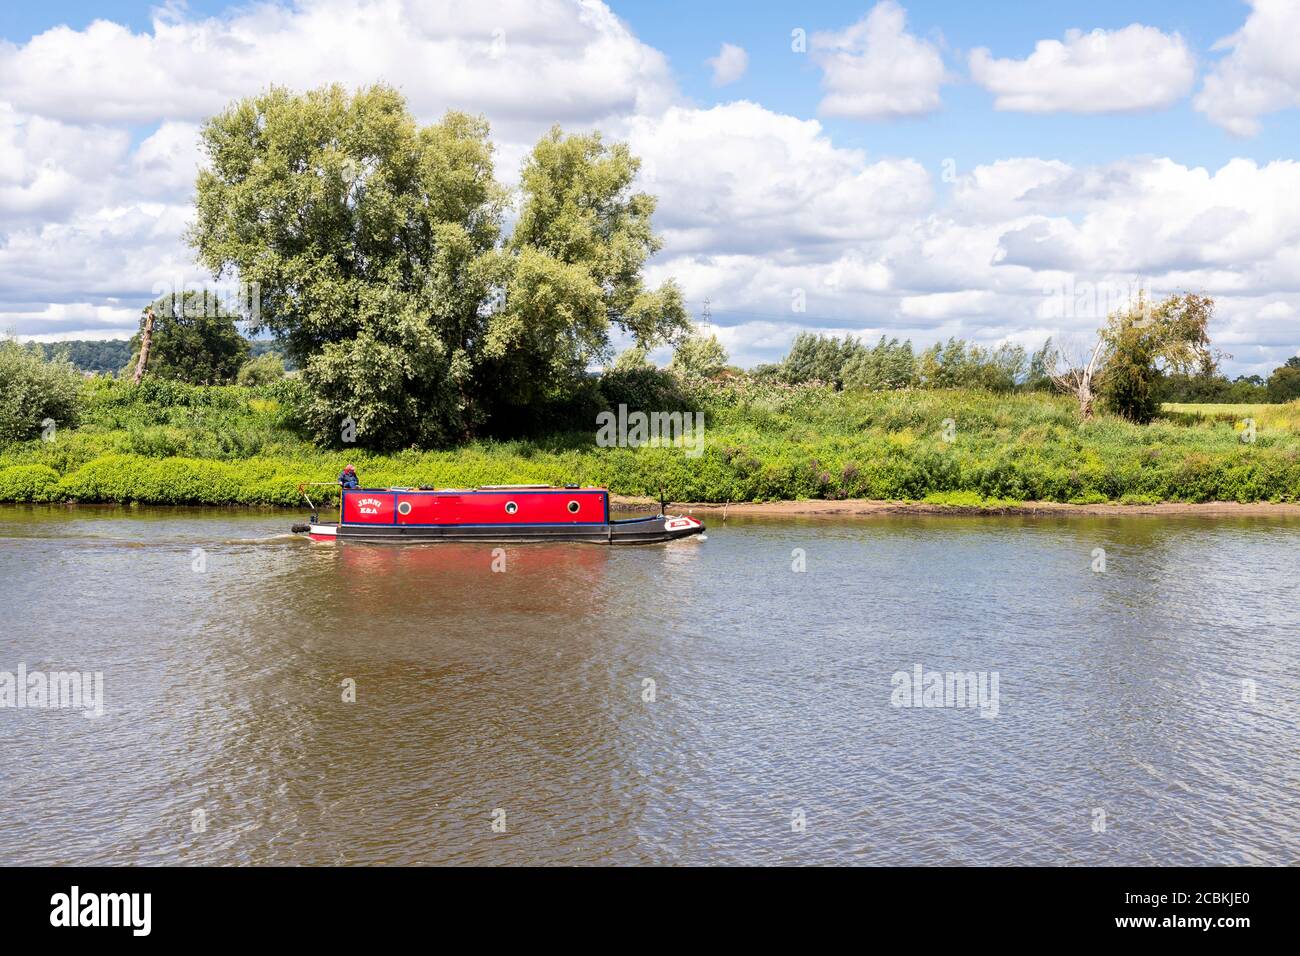 A barge or longboat cruising on the River Severn at Wainlode, Gloucestershire UK Stock Photo